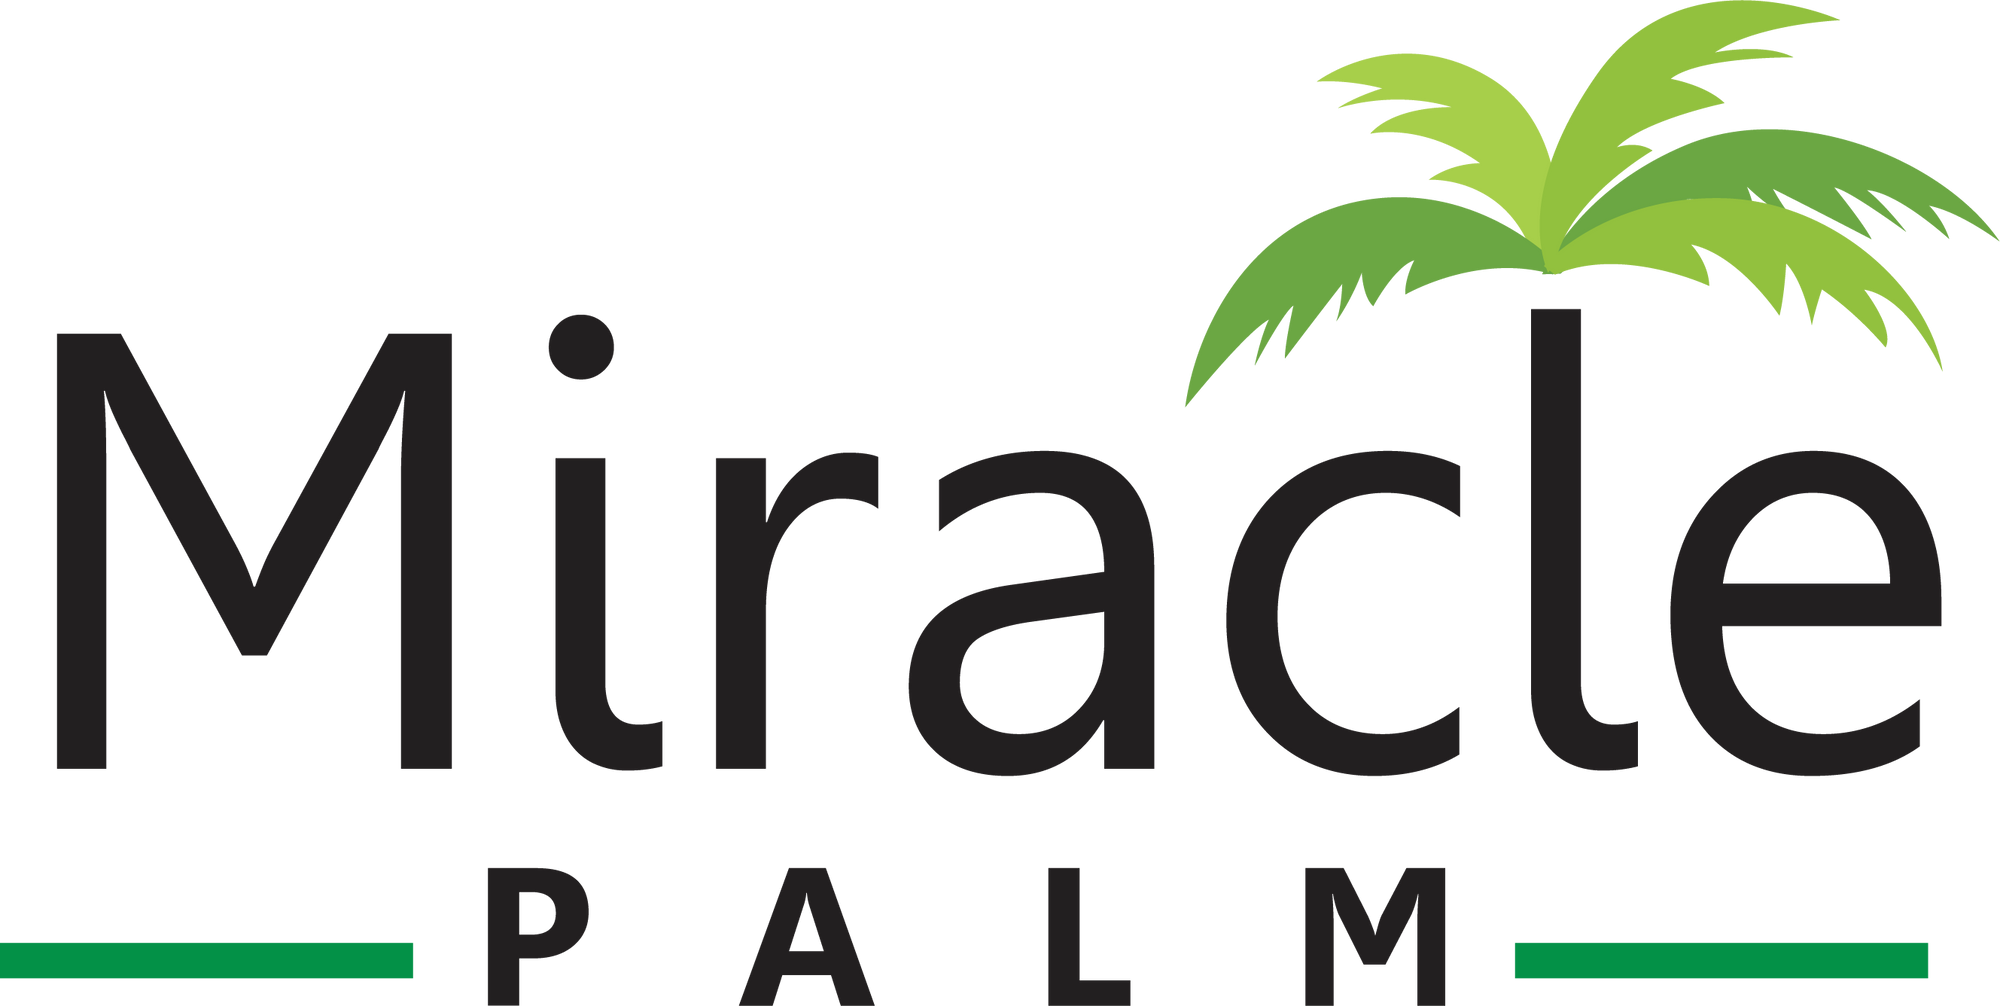 Miracle Palm